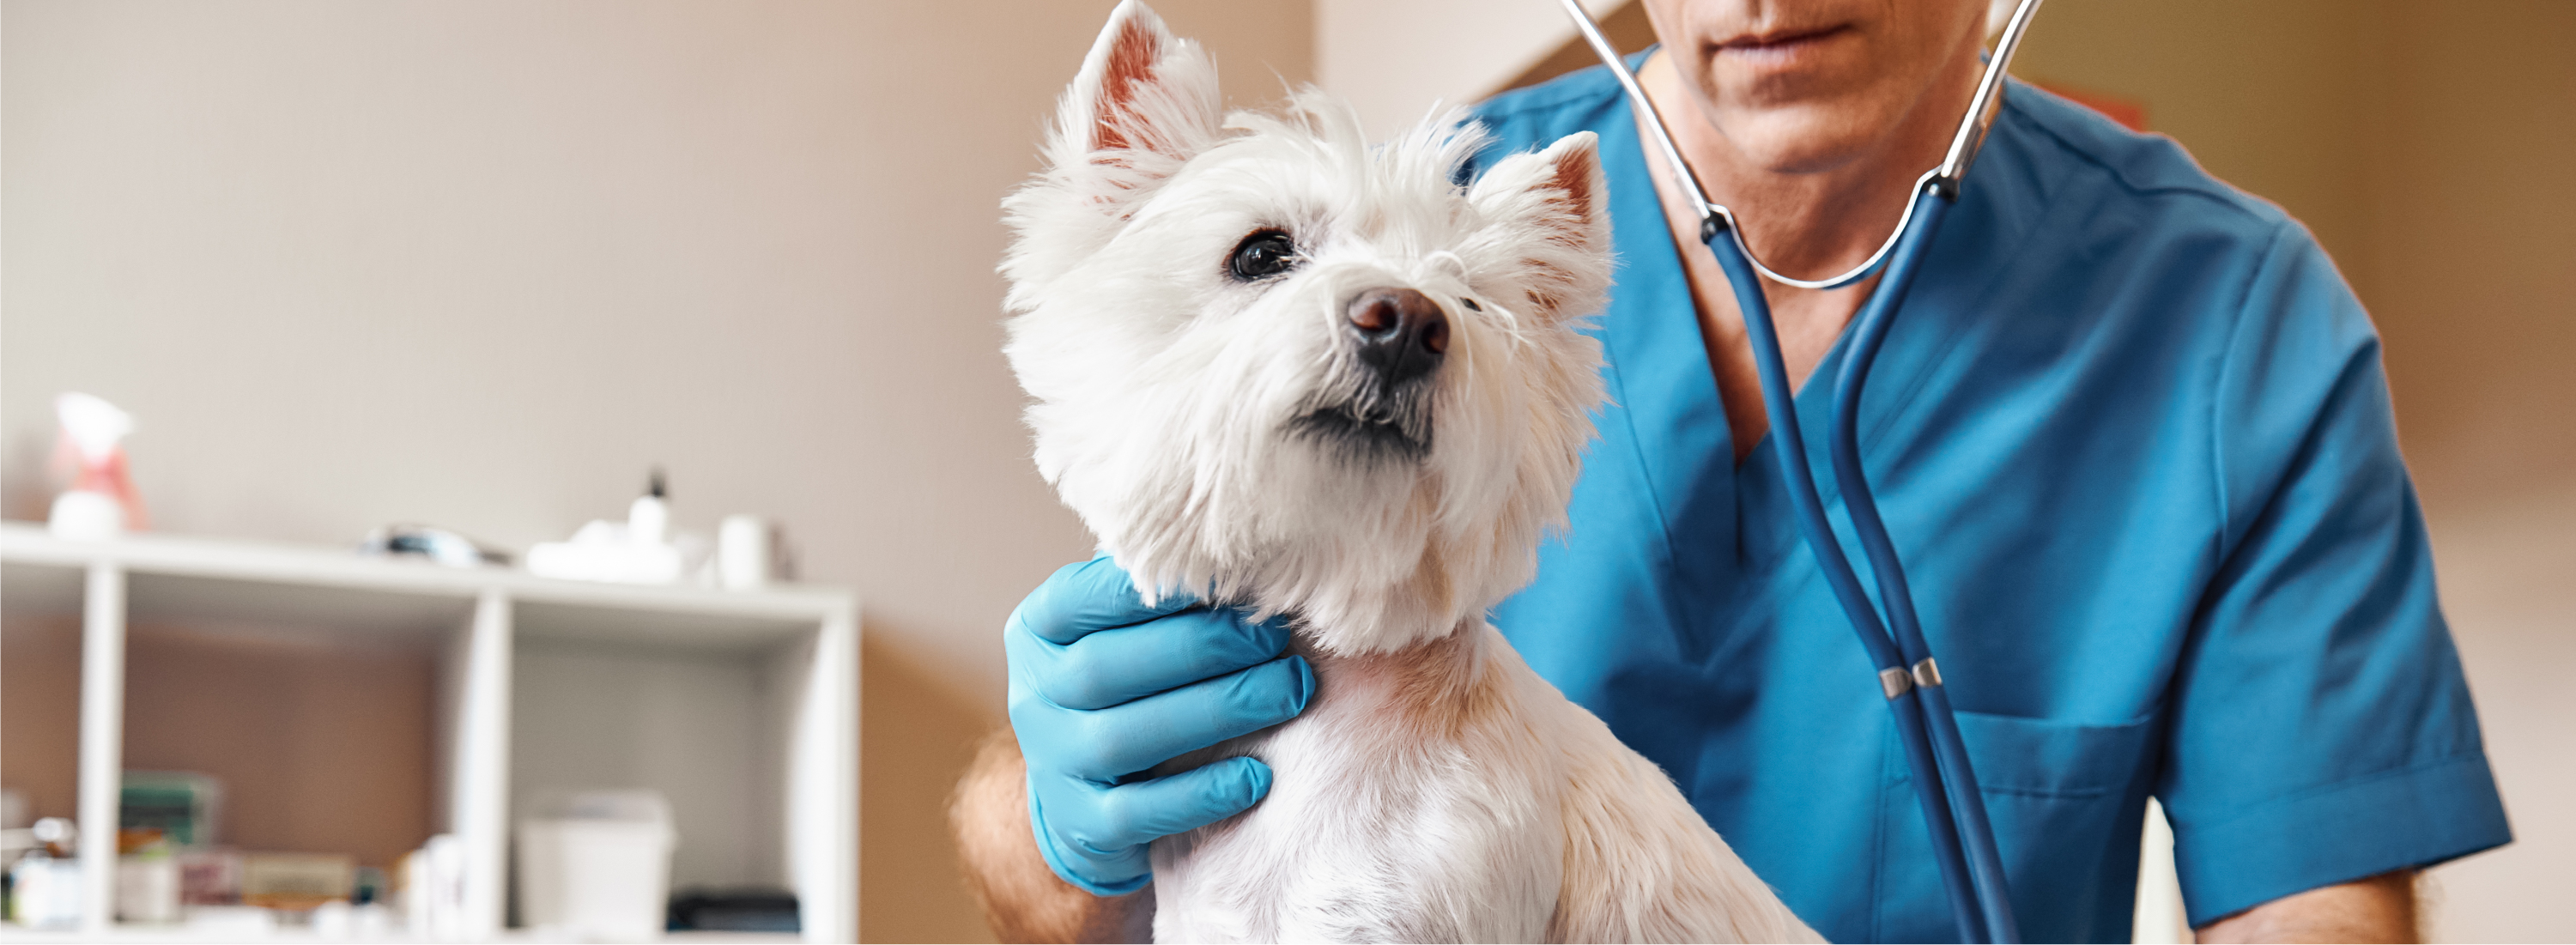 Pets health veterinary clinic and surgery